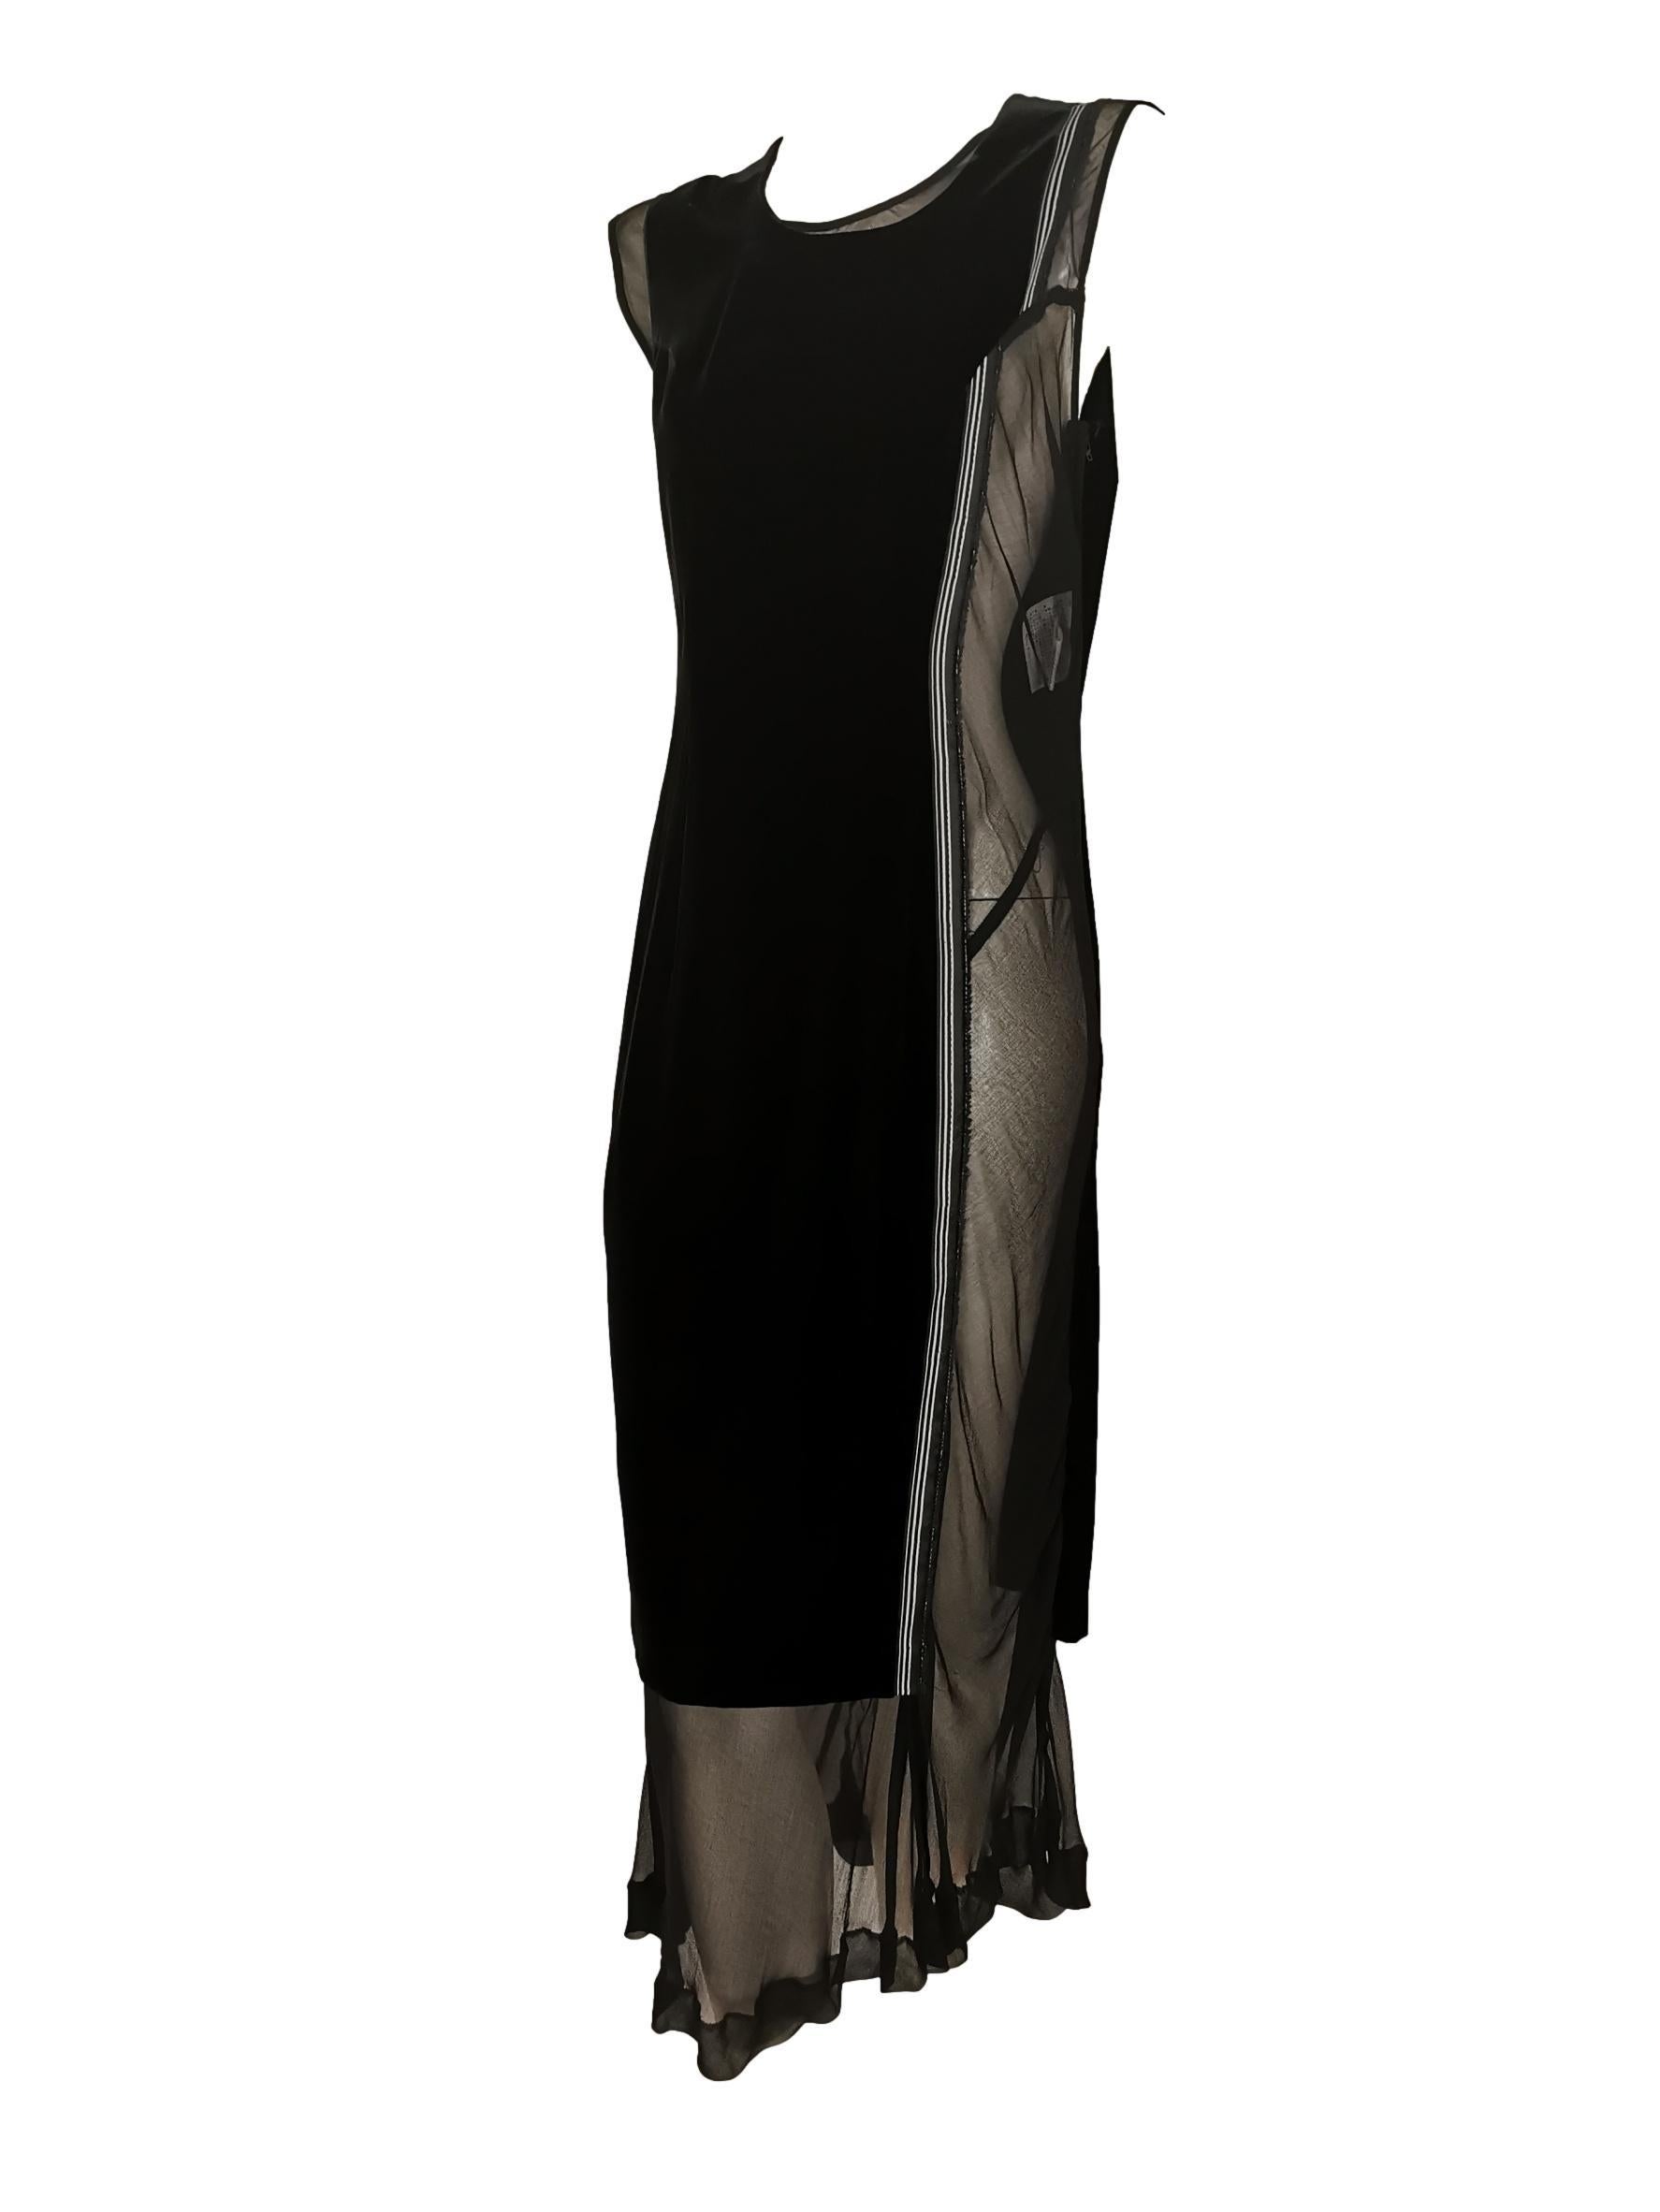 Black Comme des Garcons Fall/Winter 1997 Velvet Overlay Dress with Bias Cut Underdress For Sale